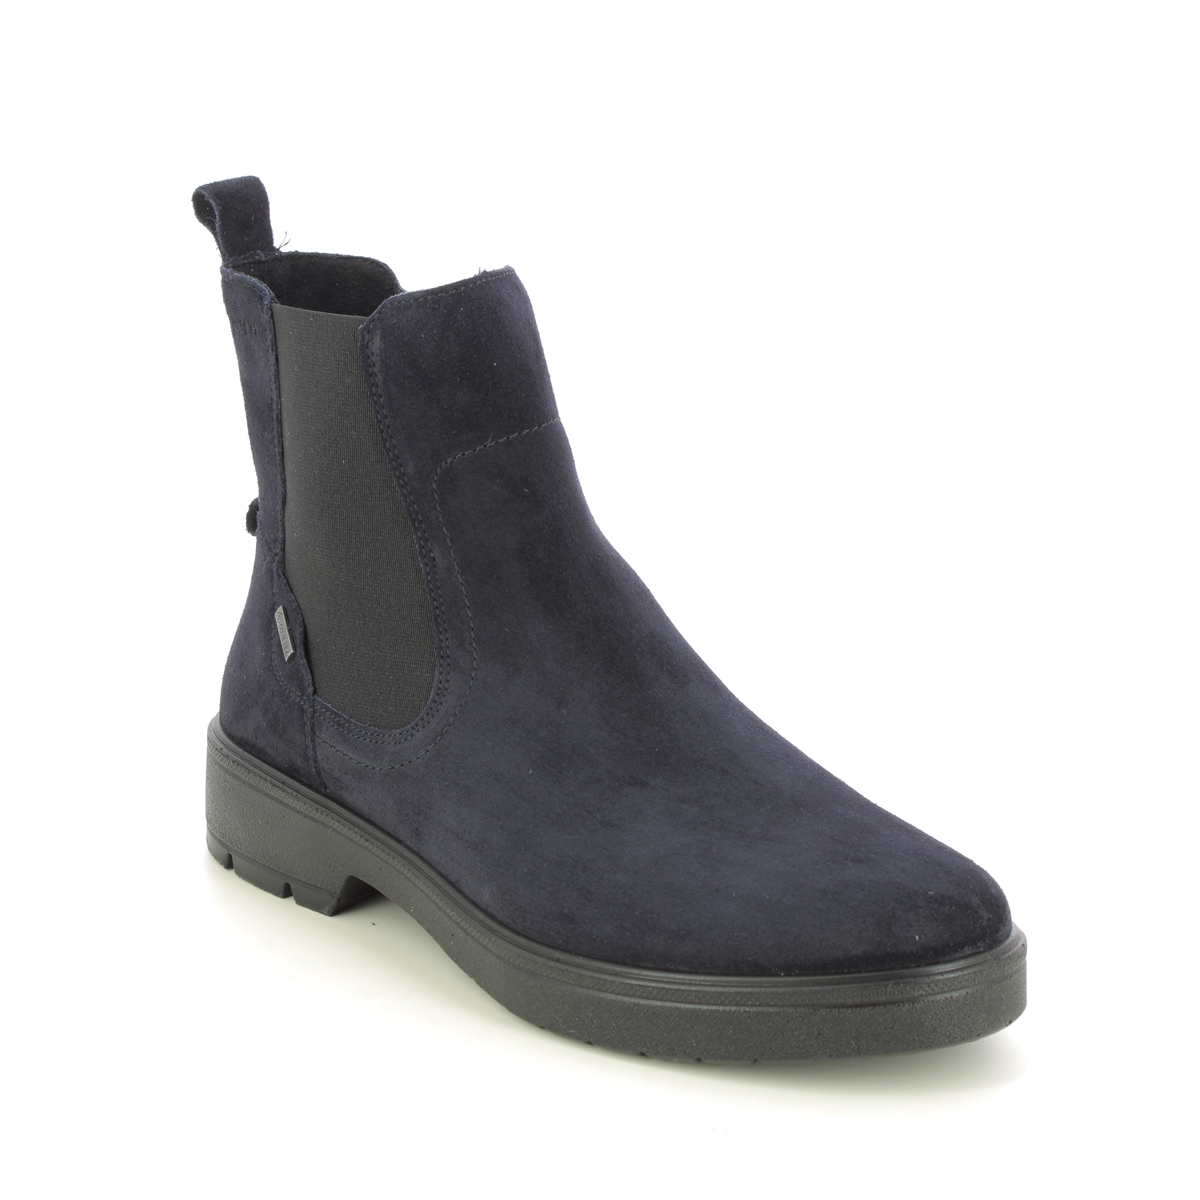 Legero Mystic Chelsea Gtx Navy Suede Womens Chelsea Boots 2000191-8000 In Size 7 In Plain Navy Suede